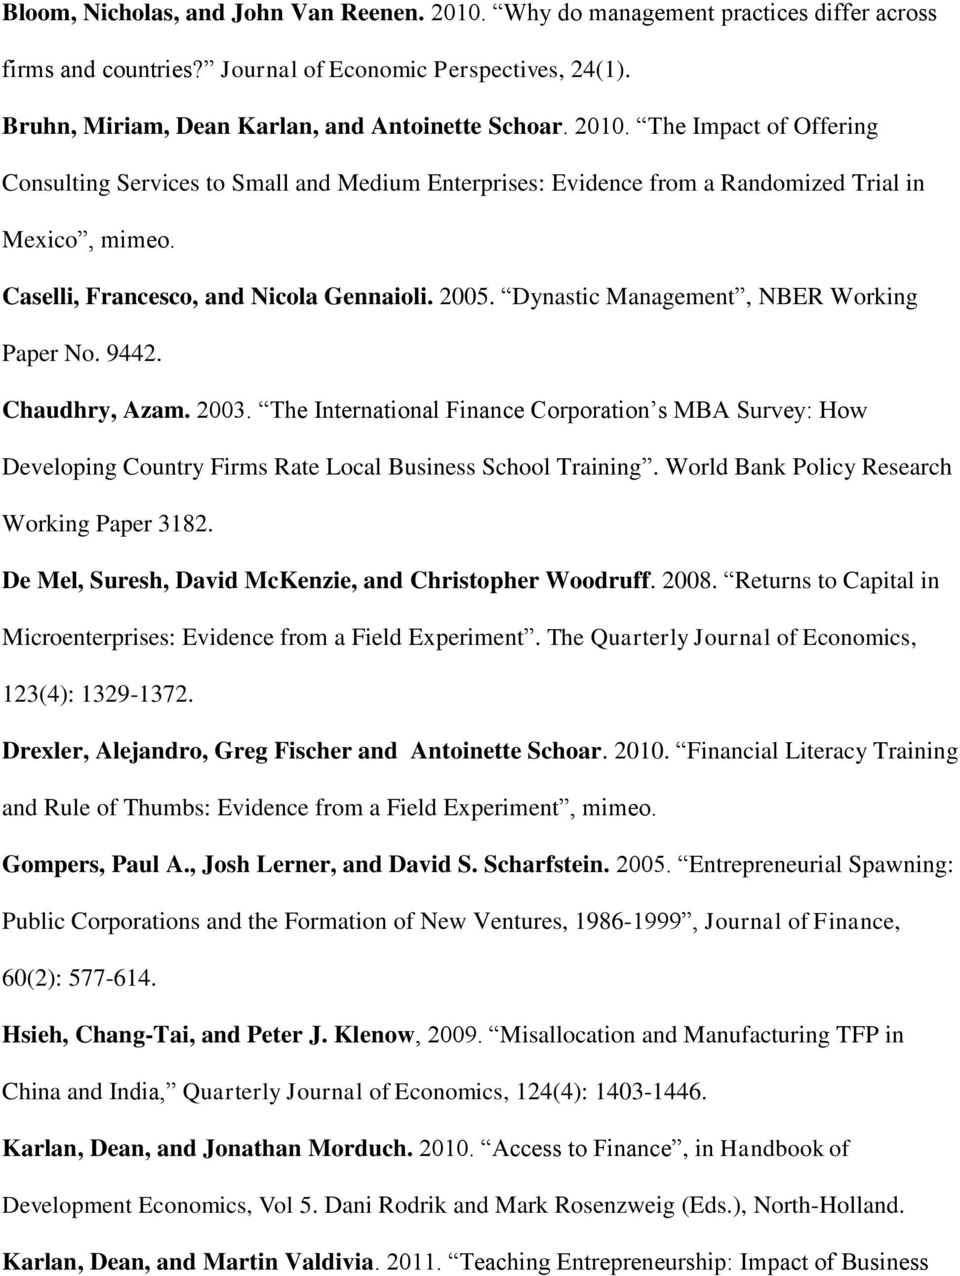 Dynastic Management, NBER Working Paper No. 9442. Chaudhry, Azam. 2003. The International Finance Corporation s MBA Survey: How Developing Country Firms Rate Local Business School Training.